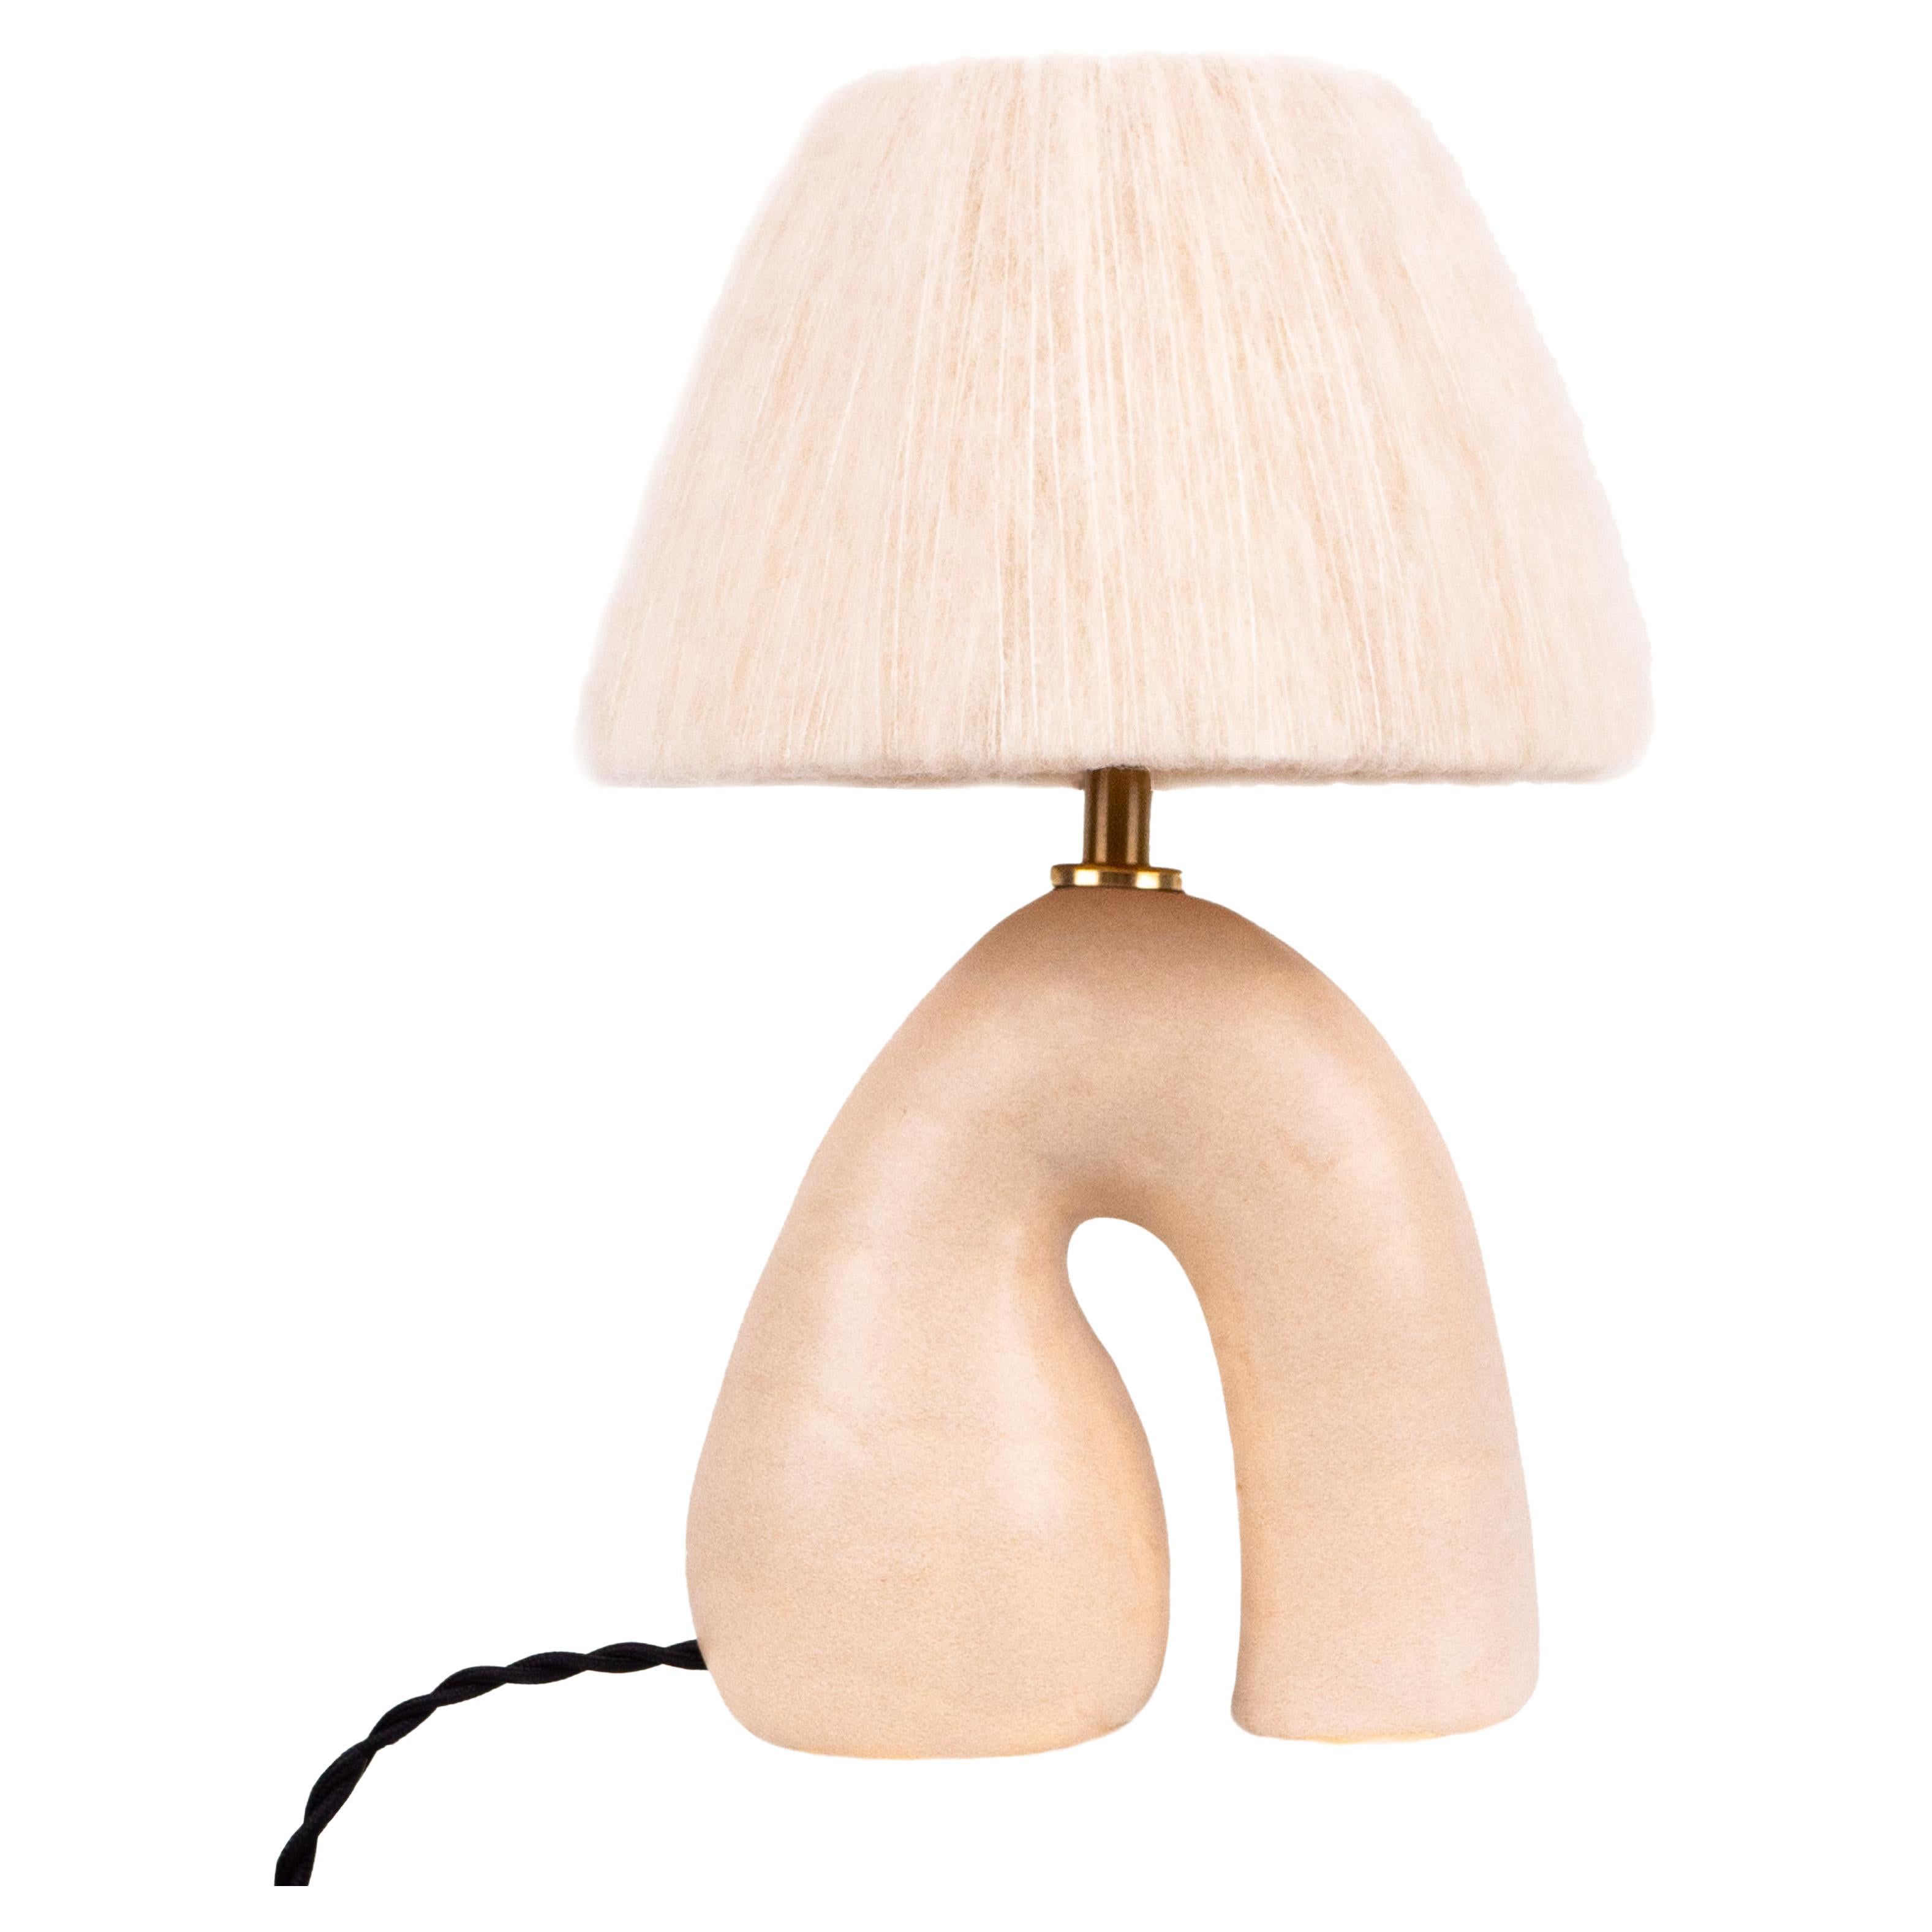 'Opposée' Table Lamp, Californian Cream 'Satin', Cream Wool Shade For Sale